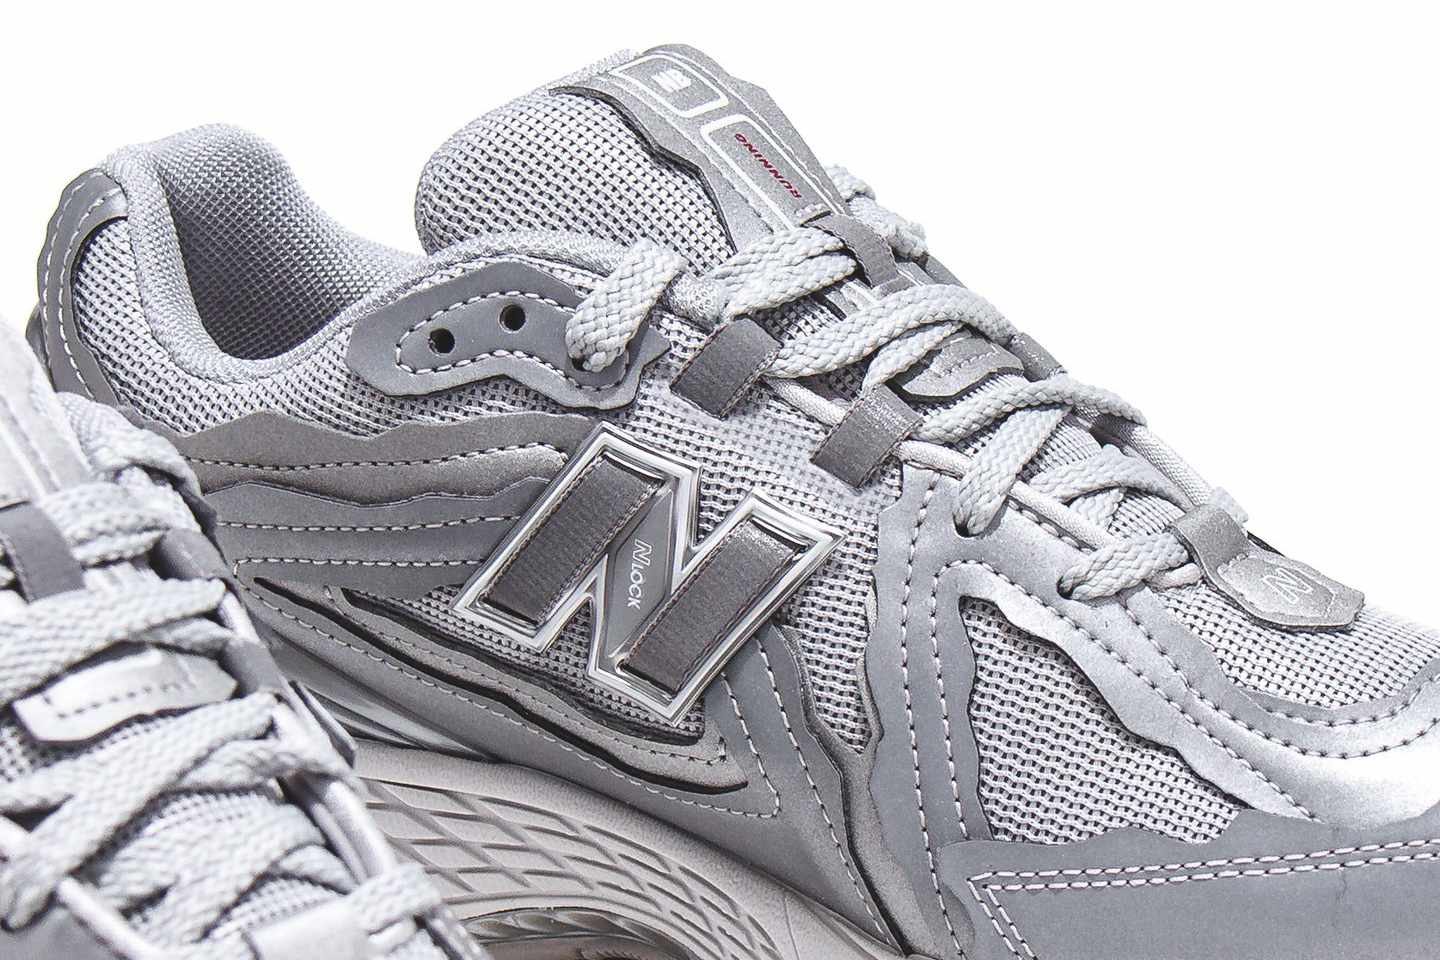 New Balance's 1906r Protection pack sneaker in a metallic silver colorway